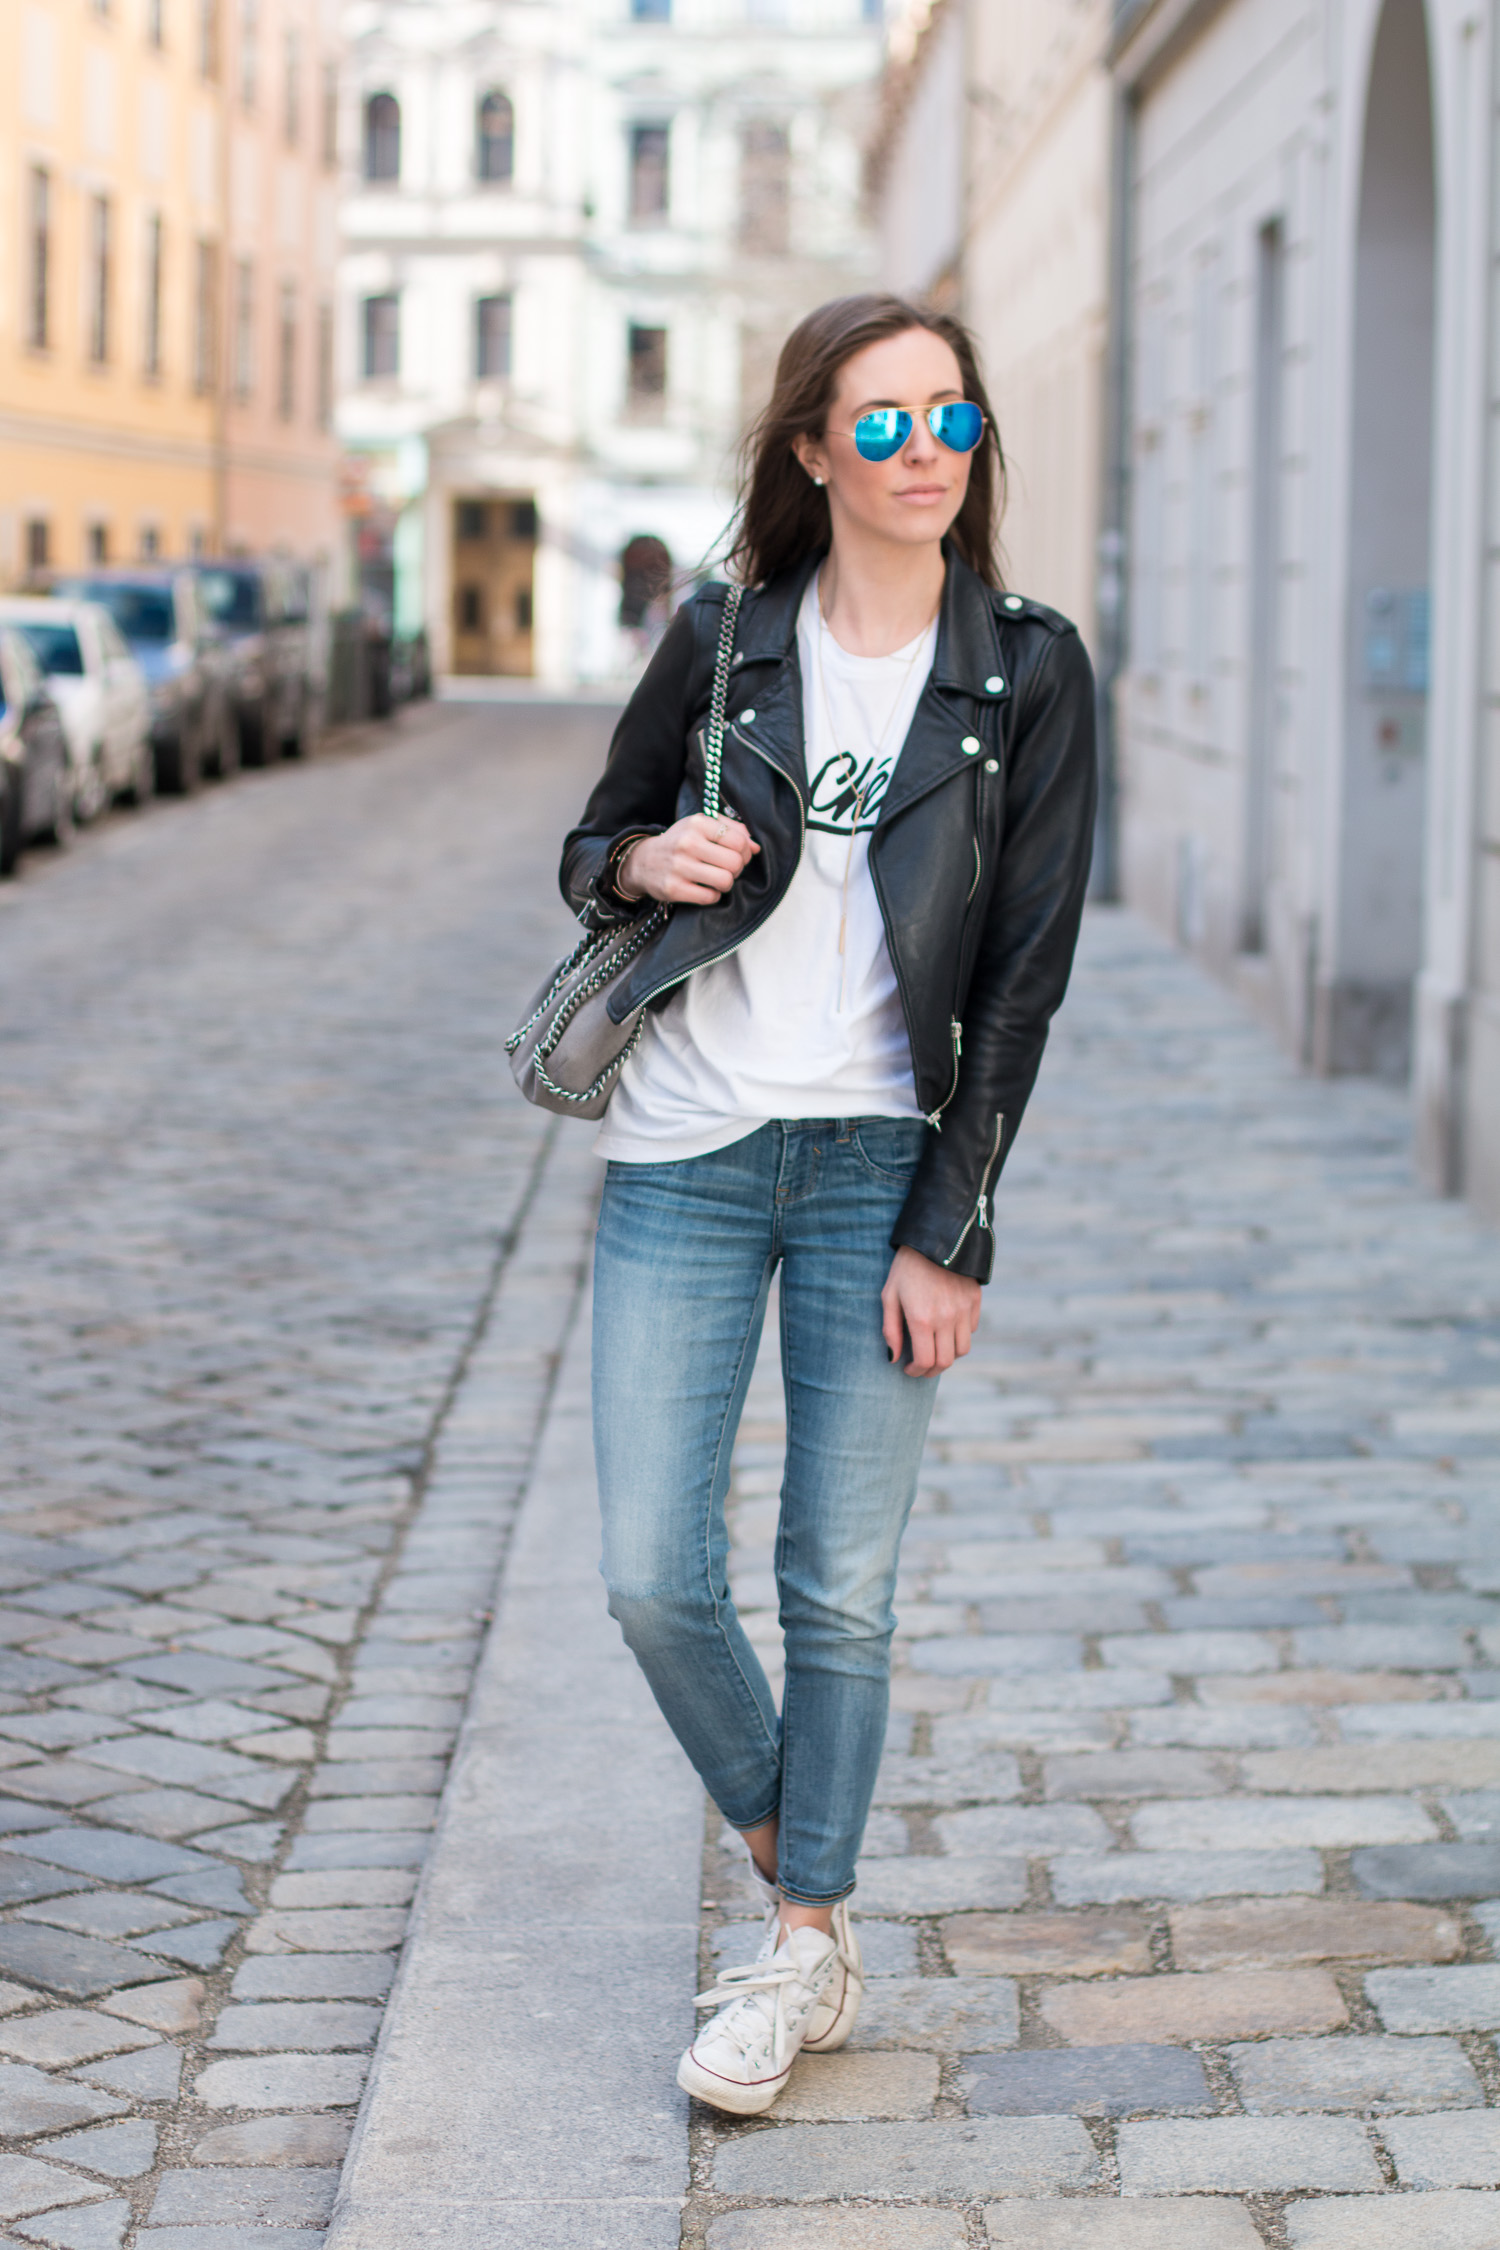 Easy Does It - Casual Work Wear | The Daily Dose